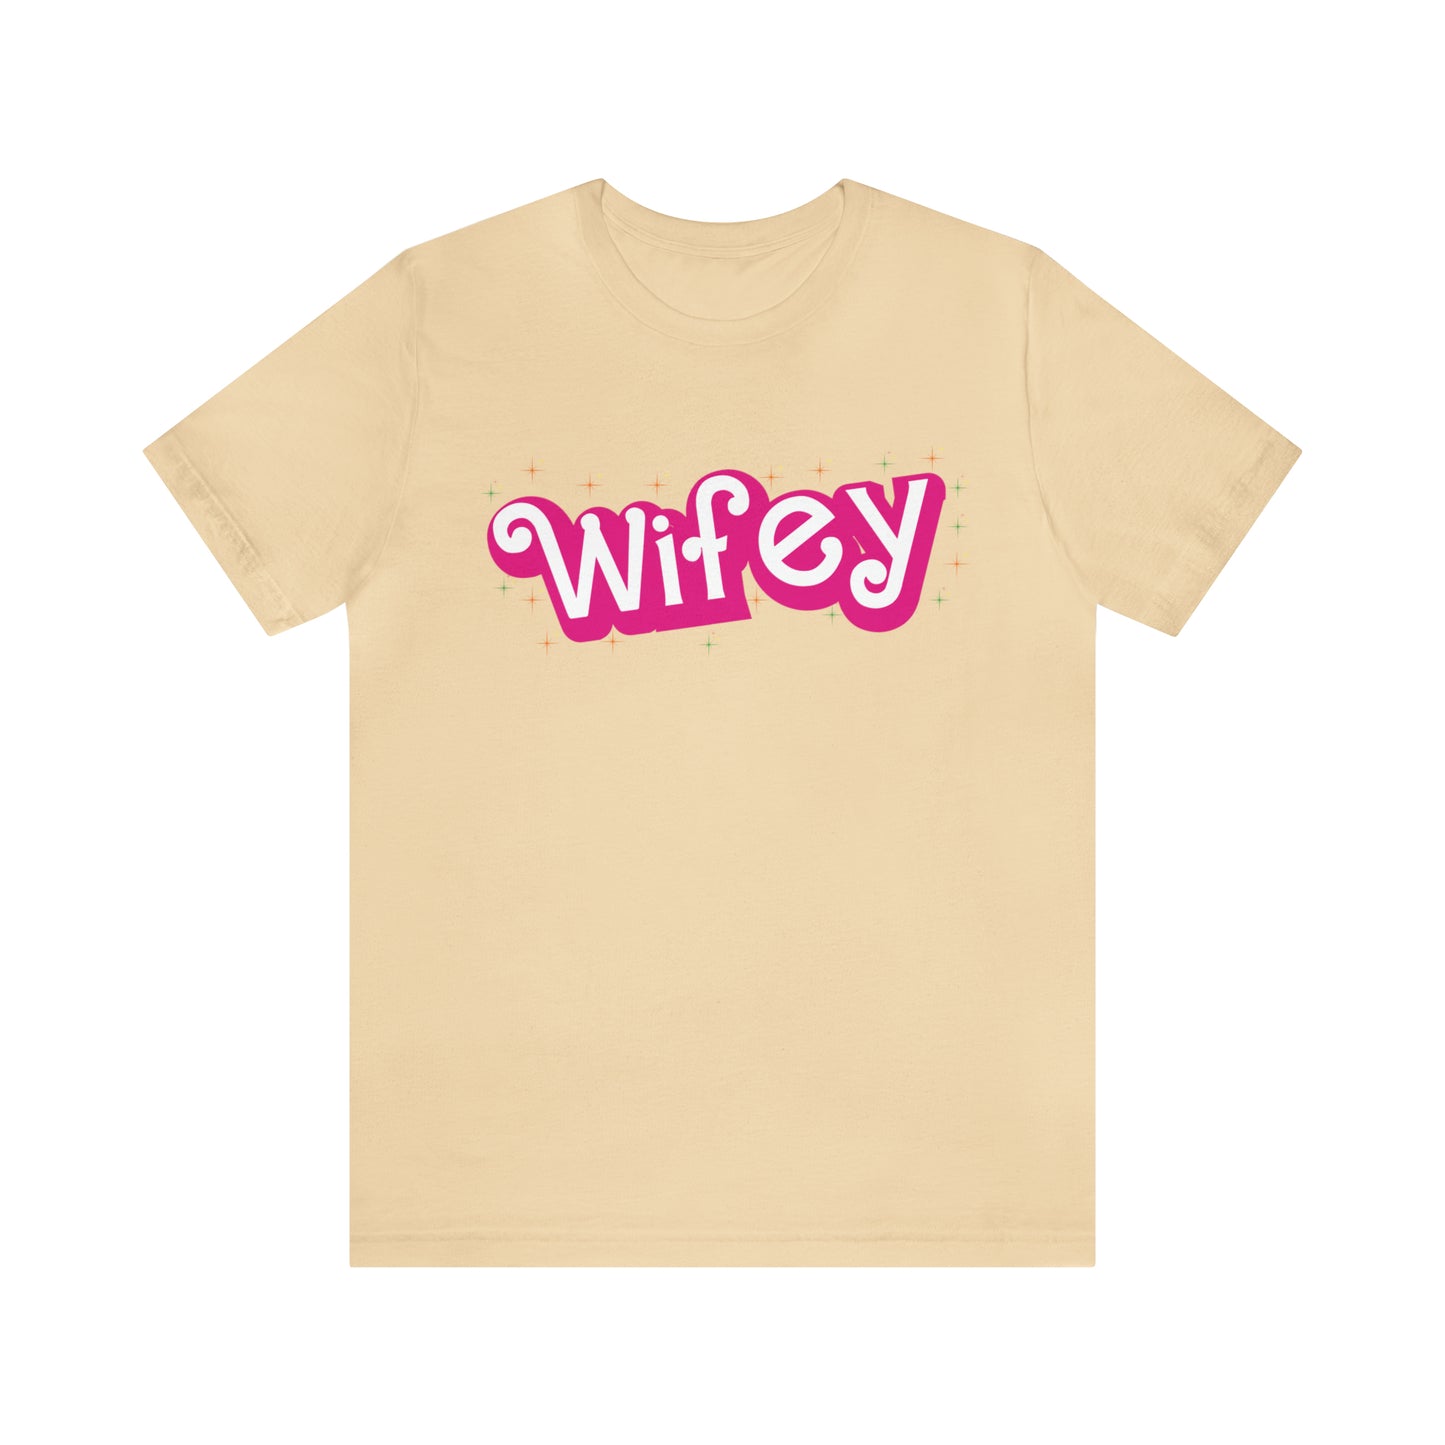 Wifey Shirt for Women, Retro Wifey TShirt for Wife, Engagement Gift For New Wife, Cute Wedding Gift For Bride Gift for Wife, T774